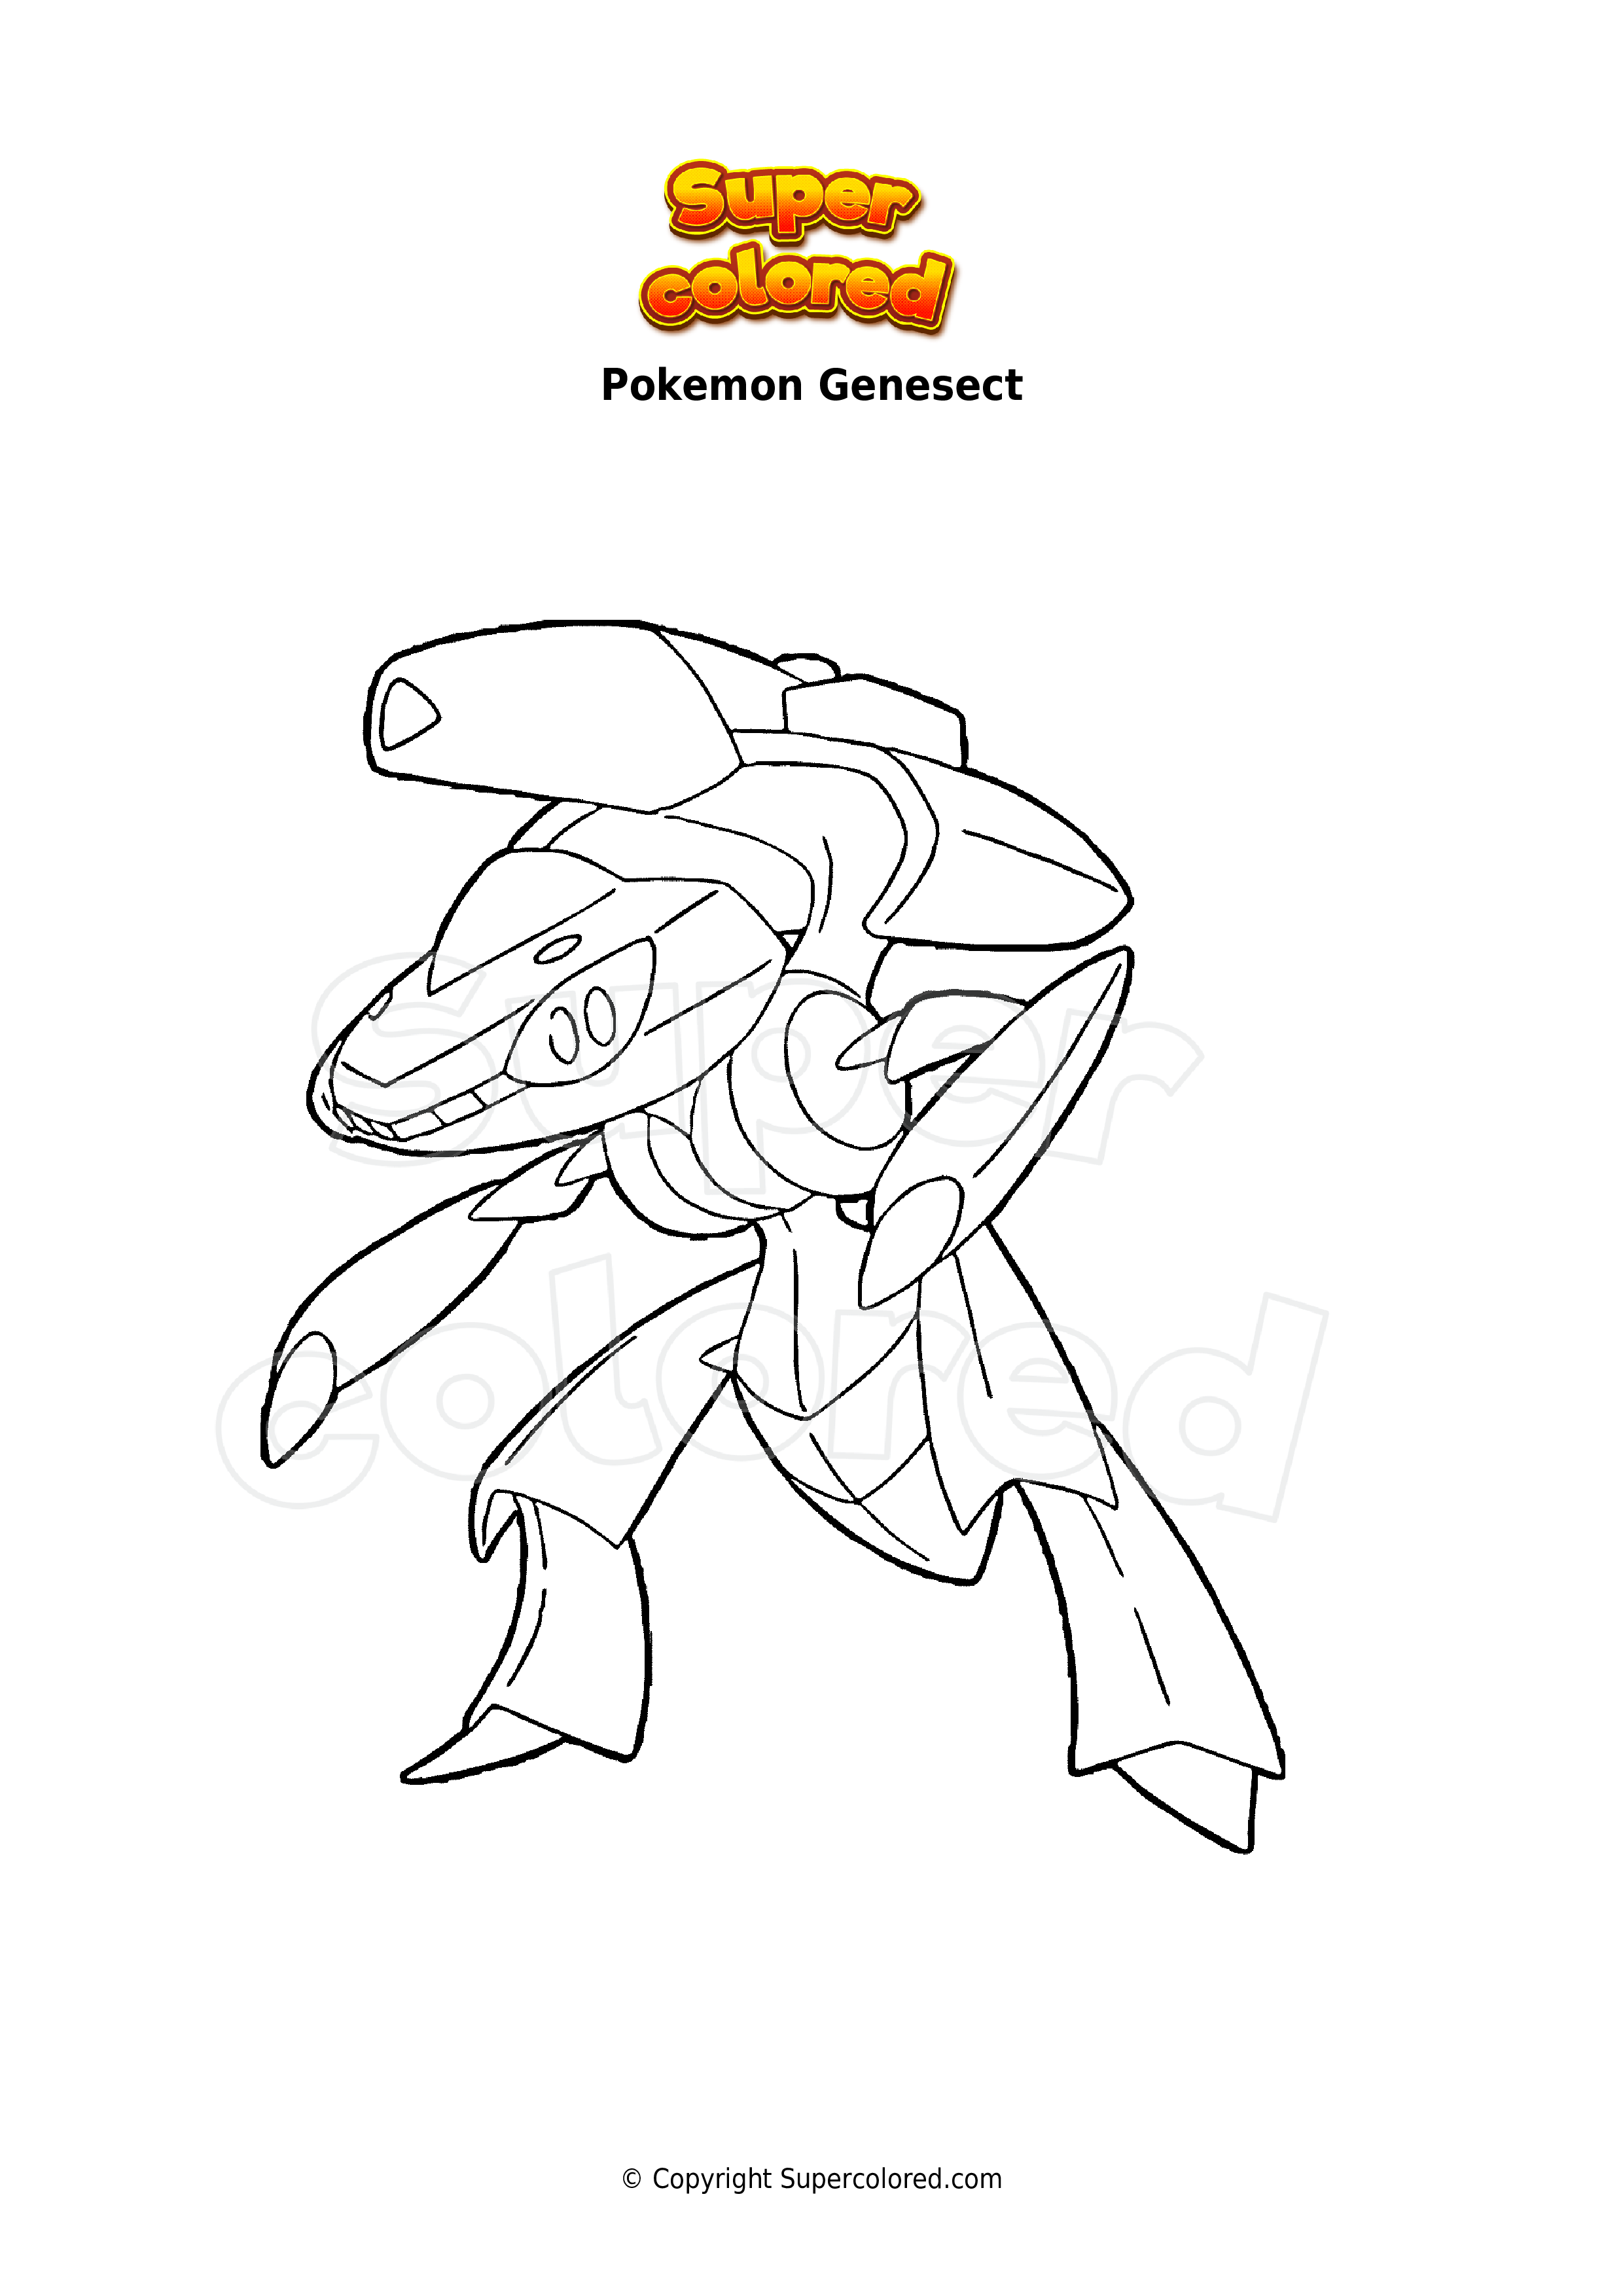 Coloring page Pokemon Genesect - Supercolored.com